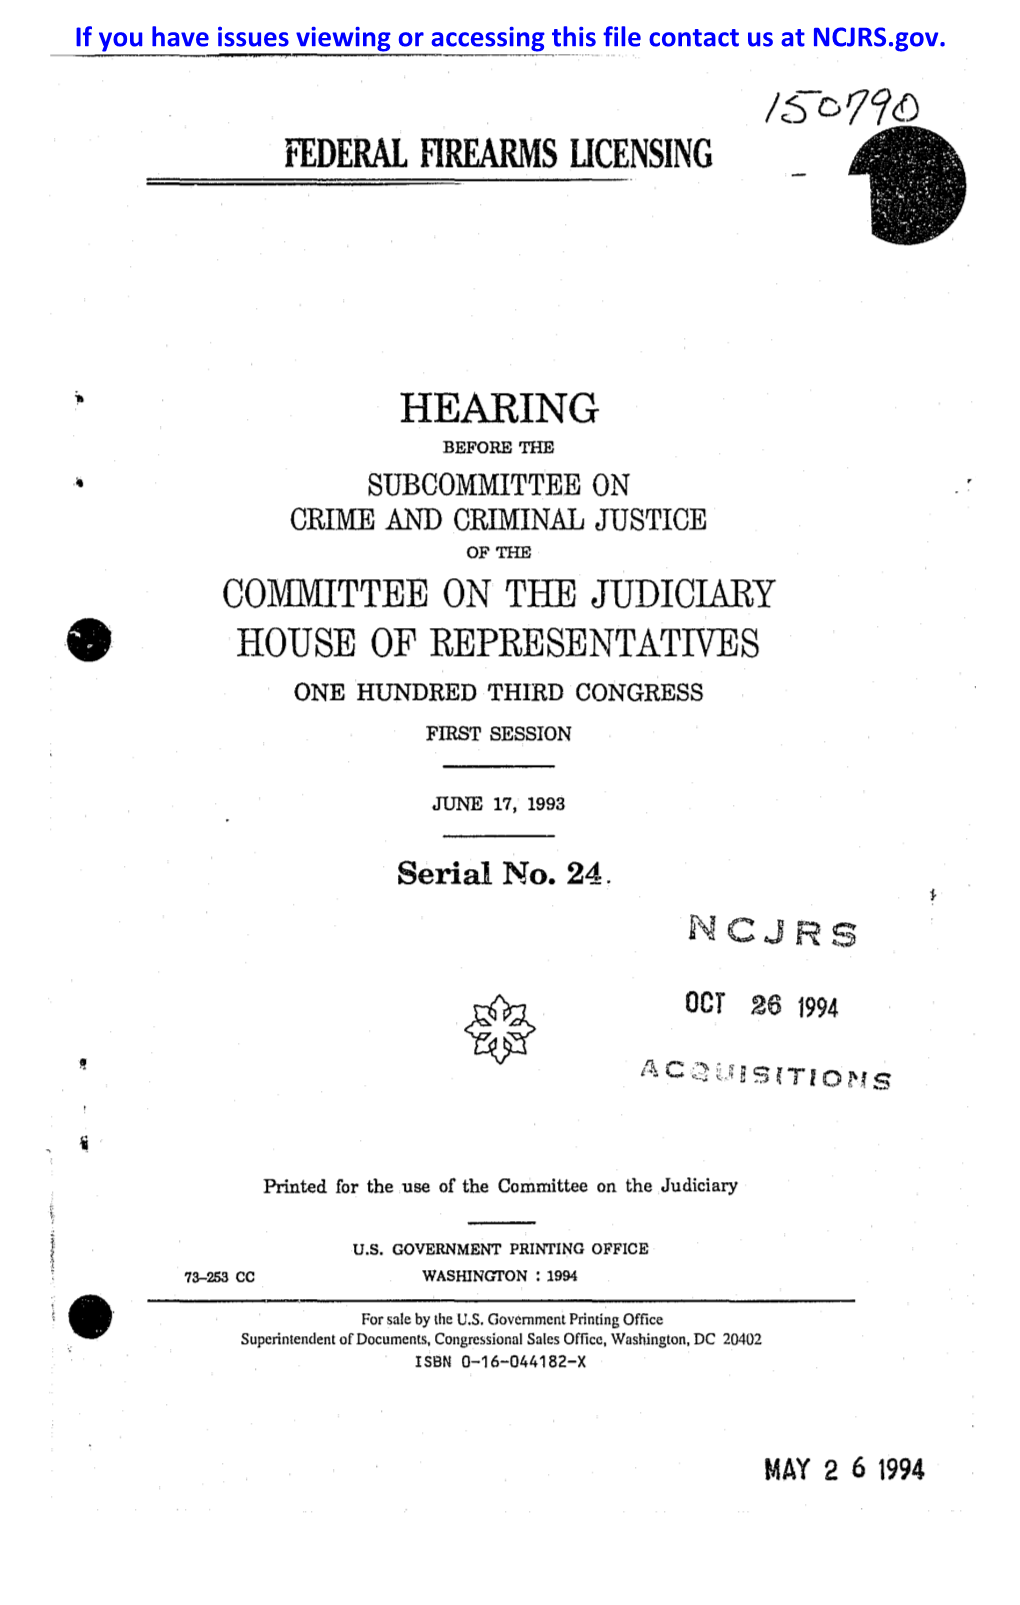 Hearing Before the Subcommittee on Crime and Criminal Justice of the Committee on the Judiciary House of Represe~Ttatives One Hundred Third Congress First Session